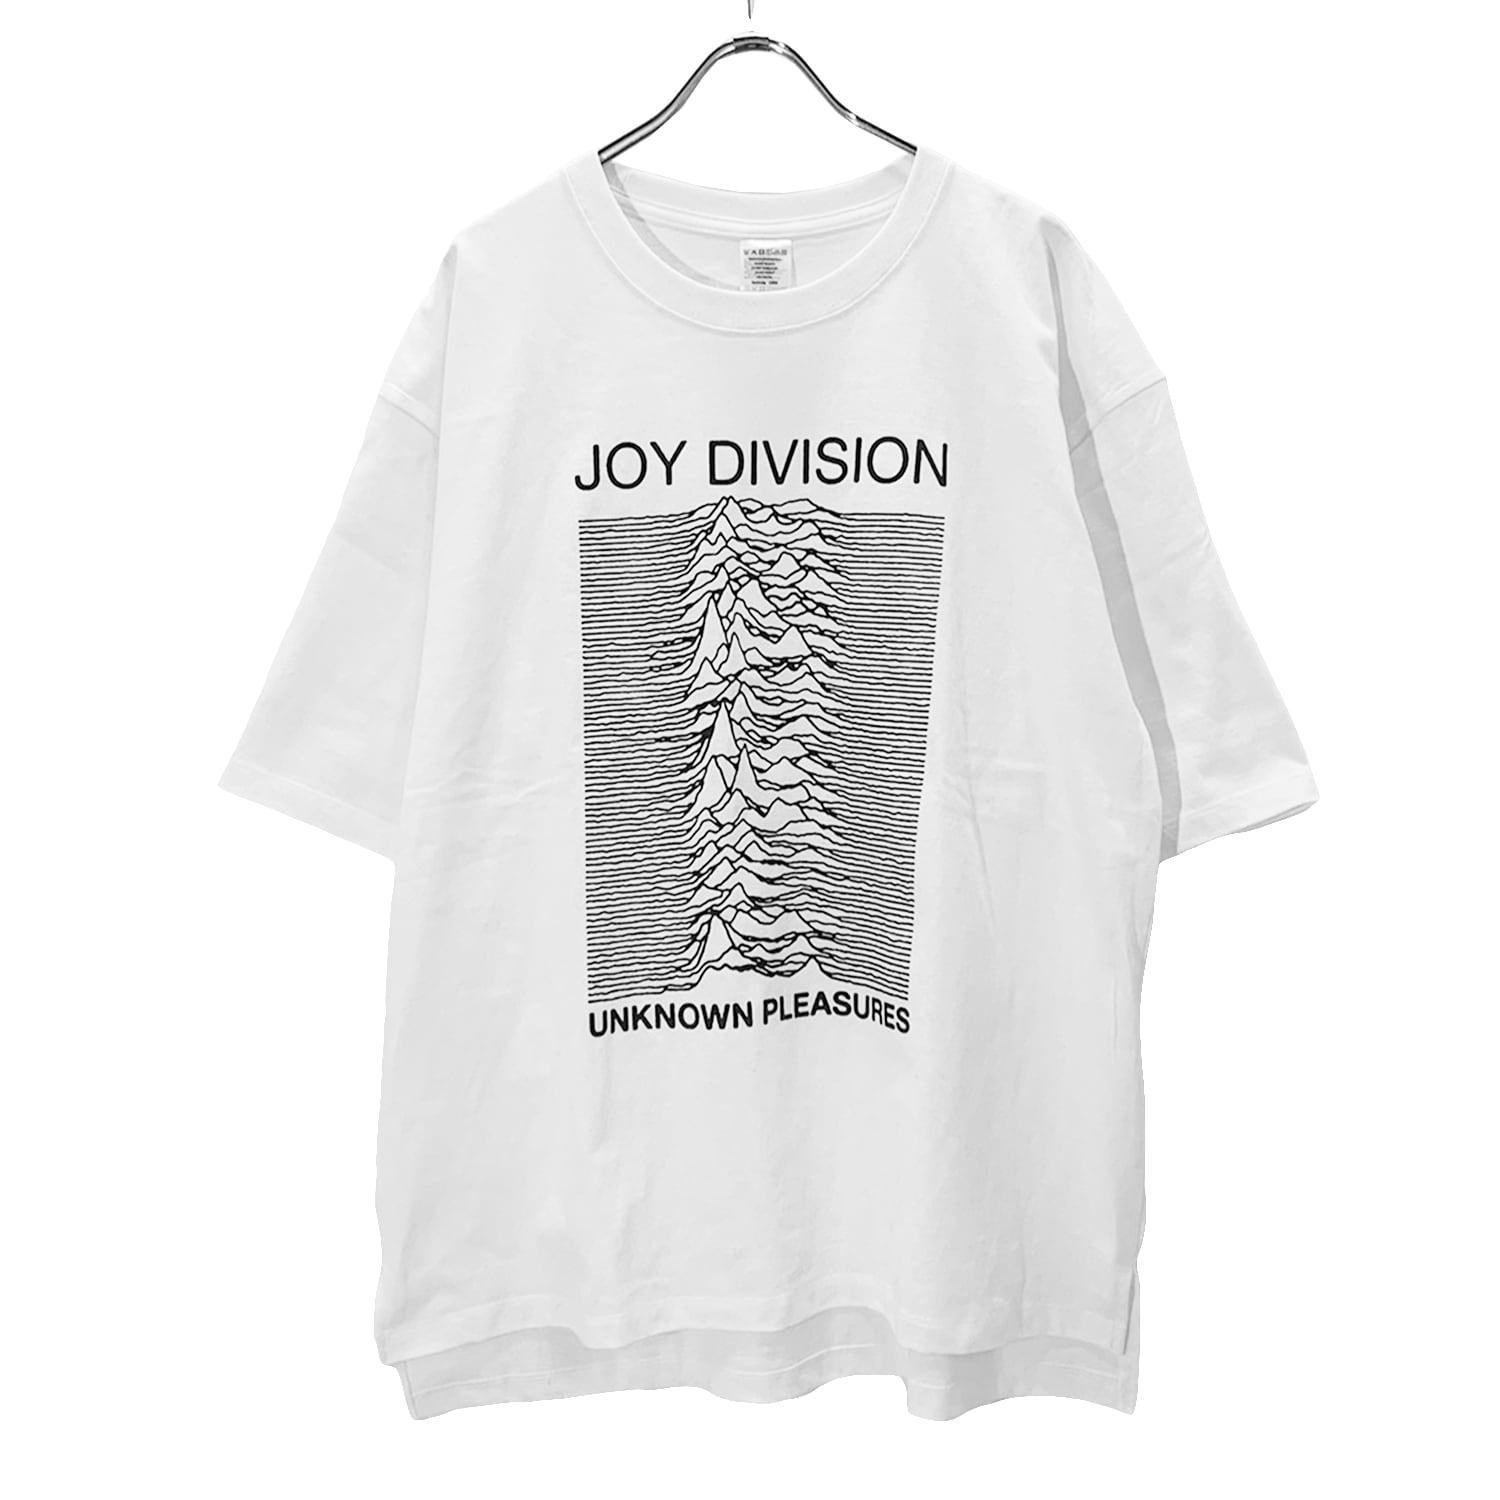 BIG TEE】JOY DIVISION [ UNKNOWN PLESURES ] ジョイディヴィジョン ビッグ Tシャツ joydivision-ssteebig-unknown  | oguoy/Destroy it Create it Share it